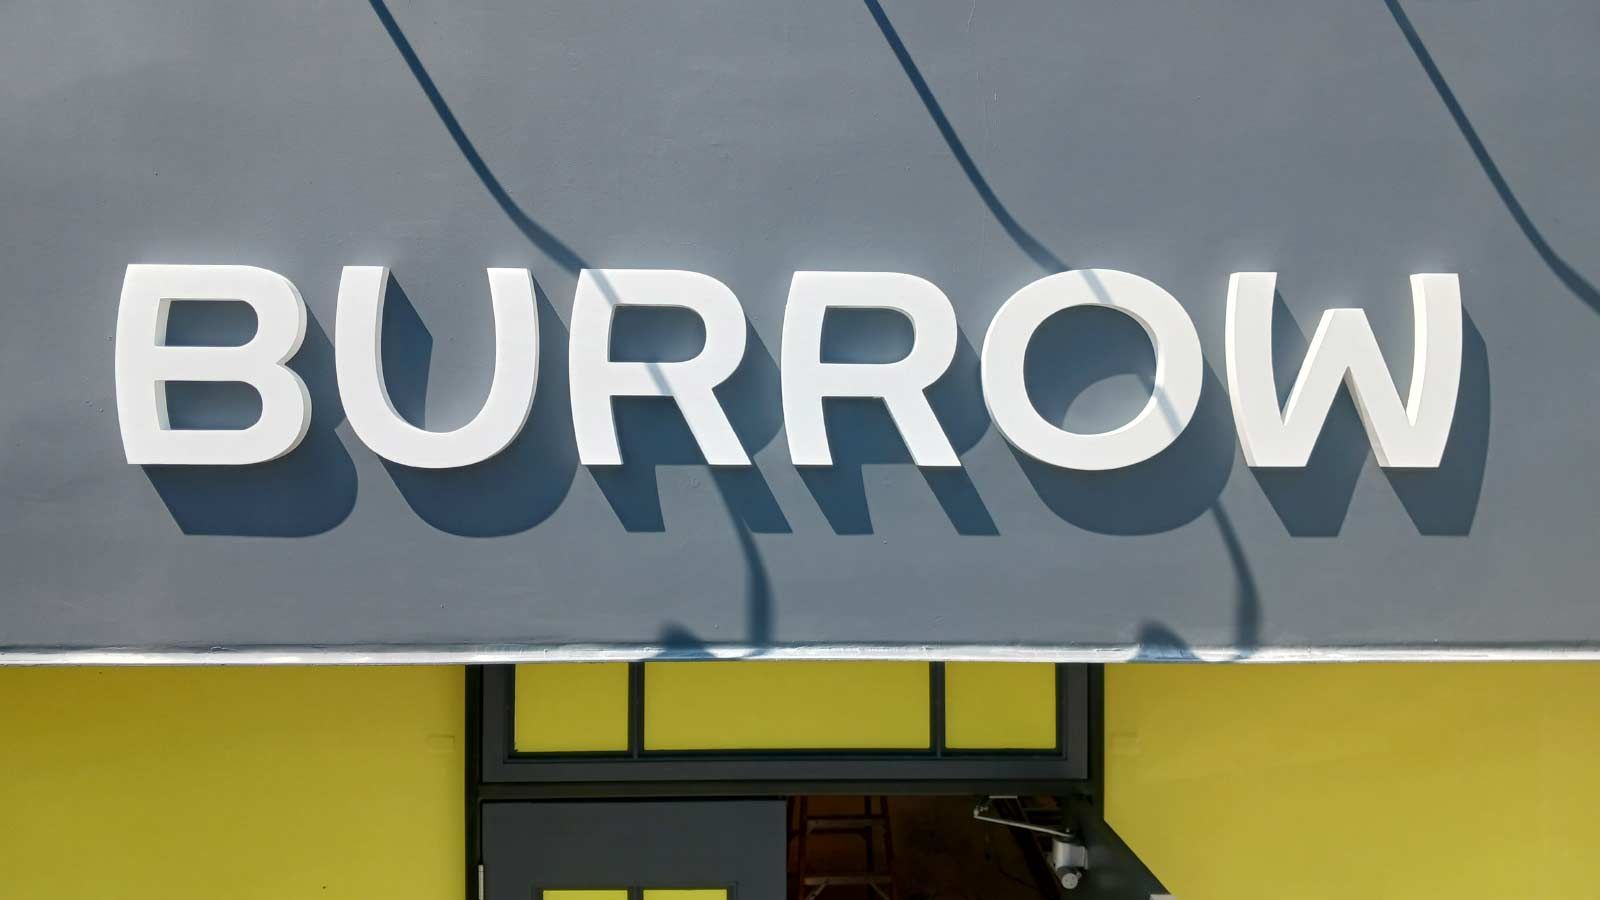 Burrow 3D sign set up on the building facade